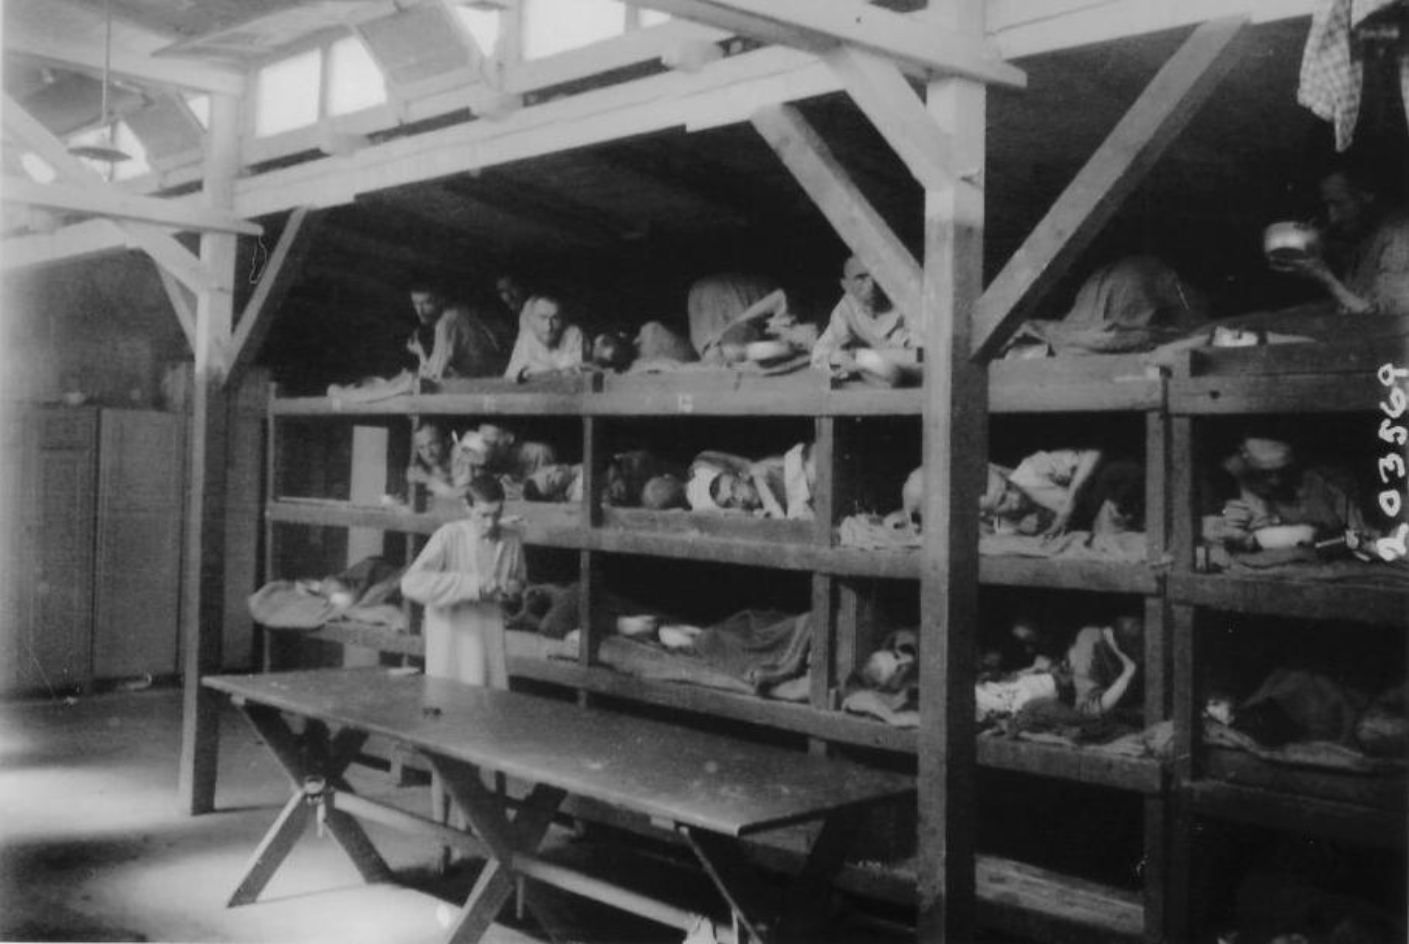 View of Block 61 of the Small Camp. In the background, surviving prisoners in sleeping boxes 11 to 15. These are wooden shelves with four shelves, in which people lie close together with thin blankets. In front of them is an empty wooden table. A liberated prisoner in a long shirt stands next to it